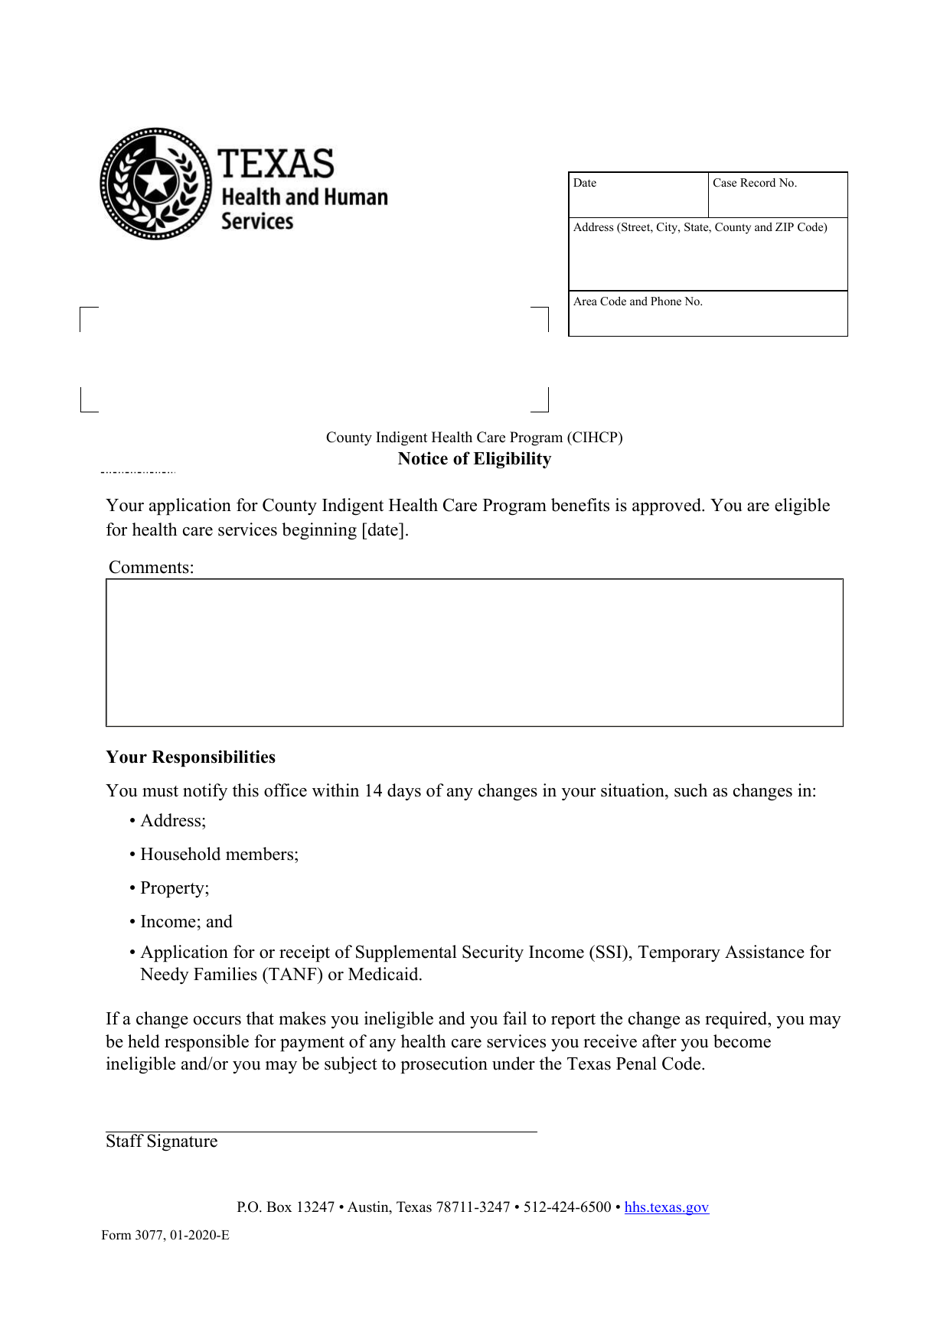 Form 3077 Notice of Eligibility - Texas, Page 1